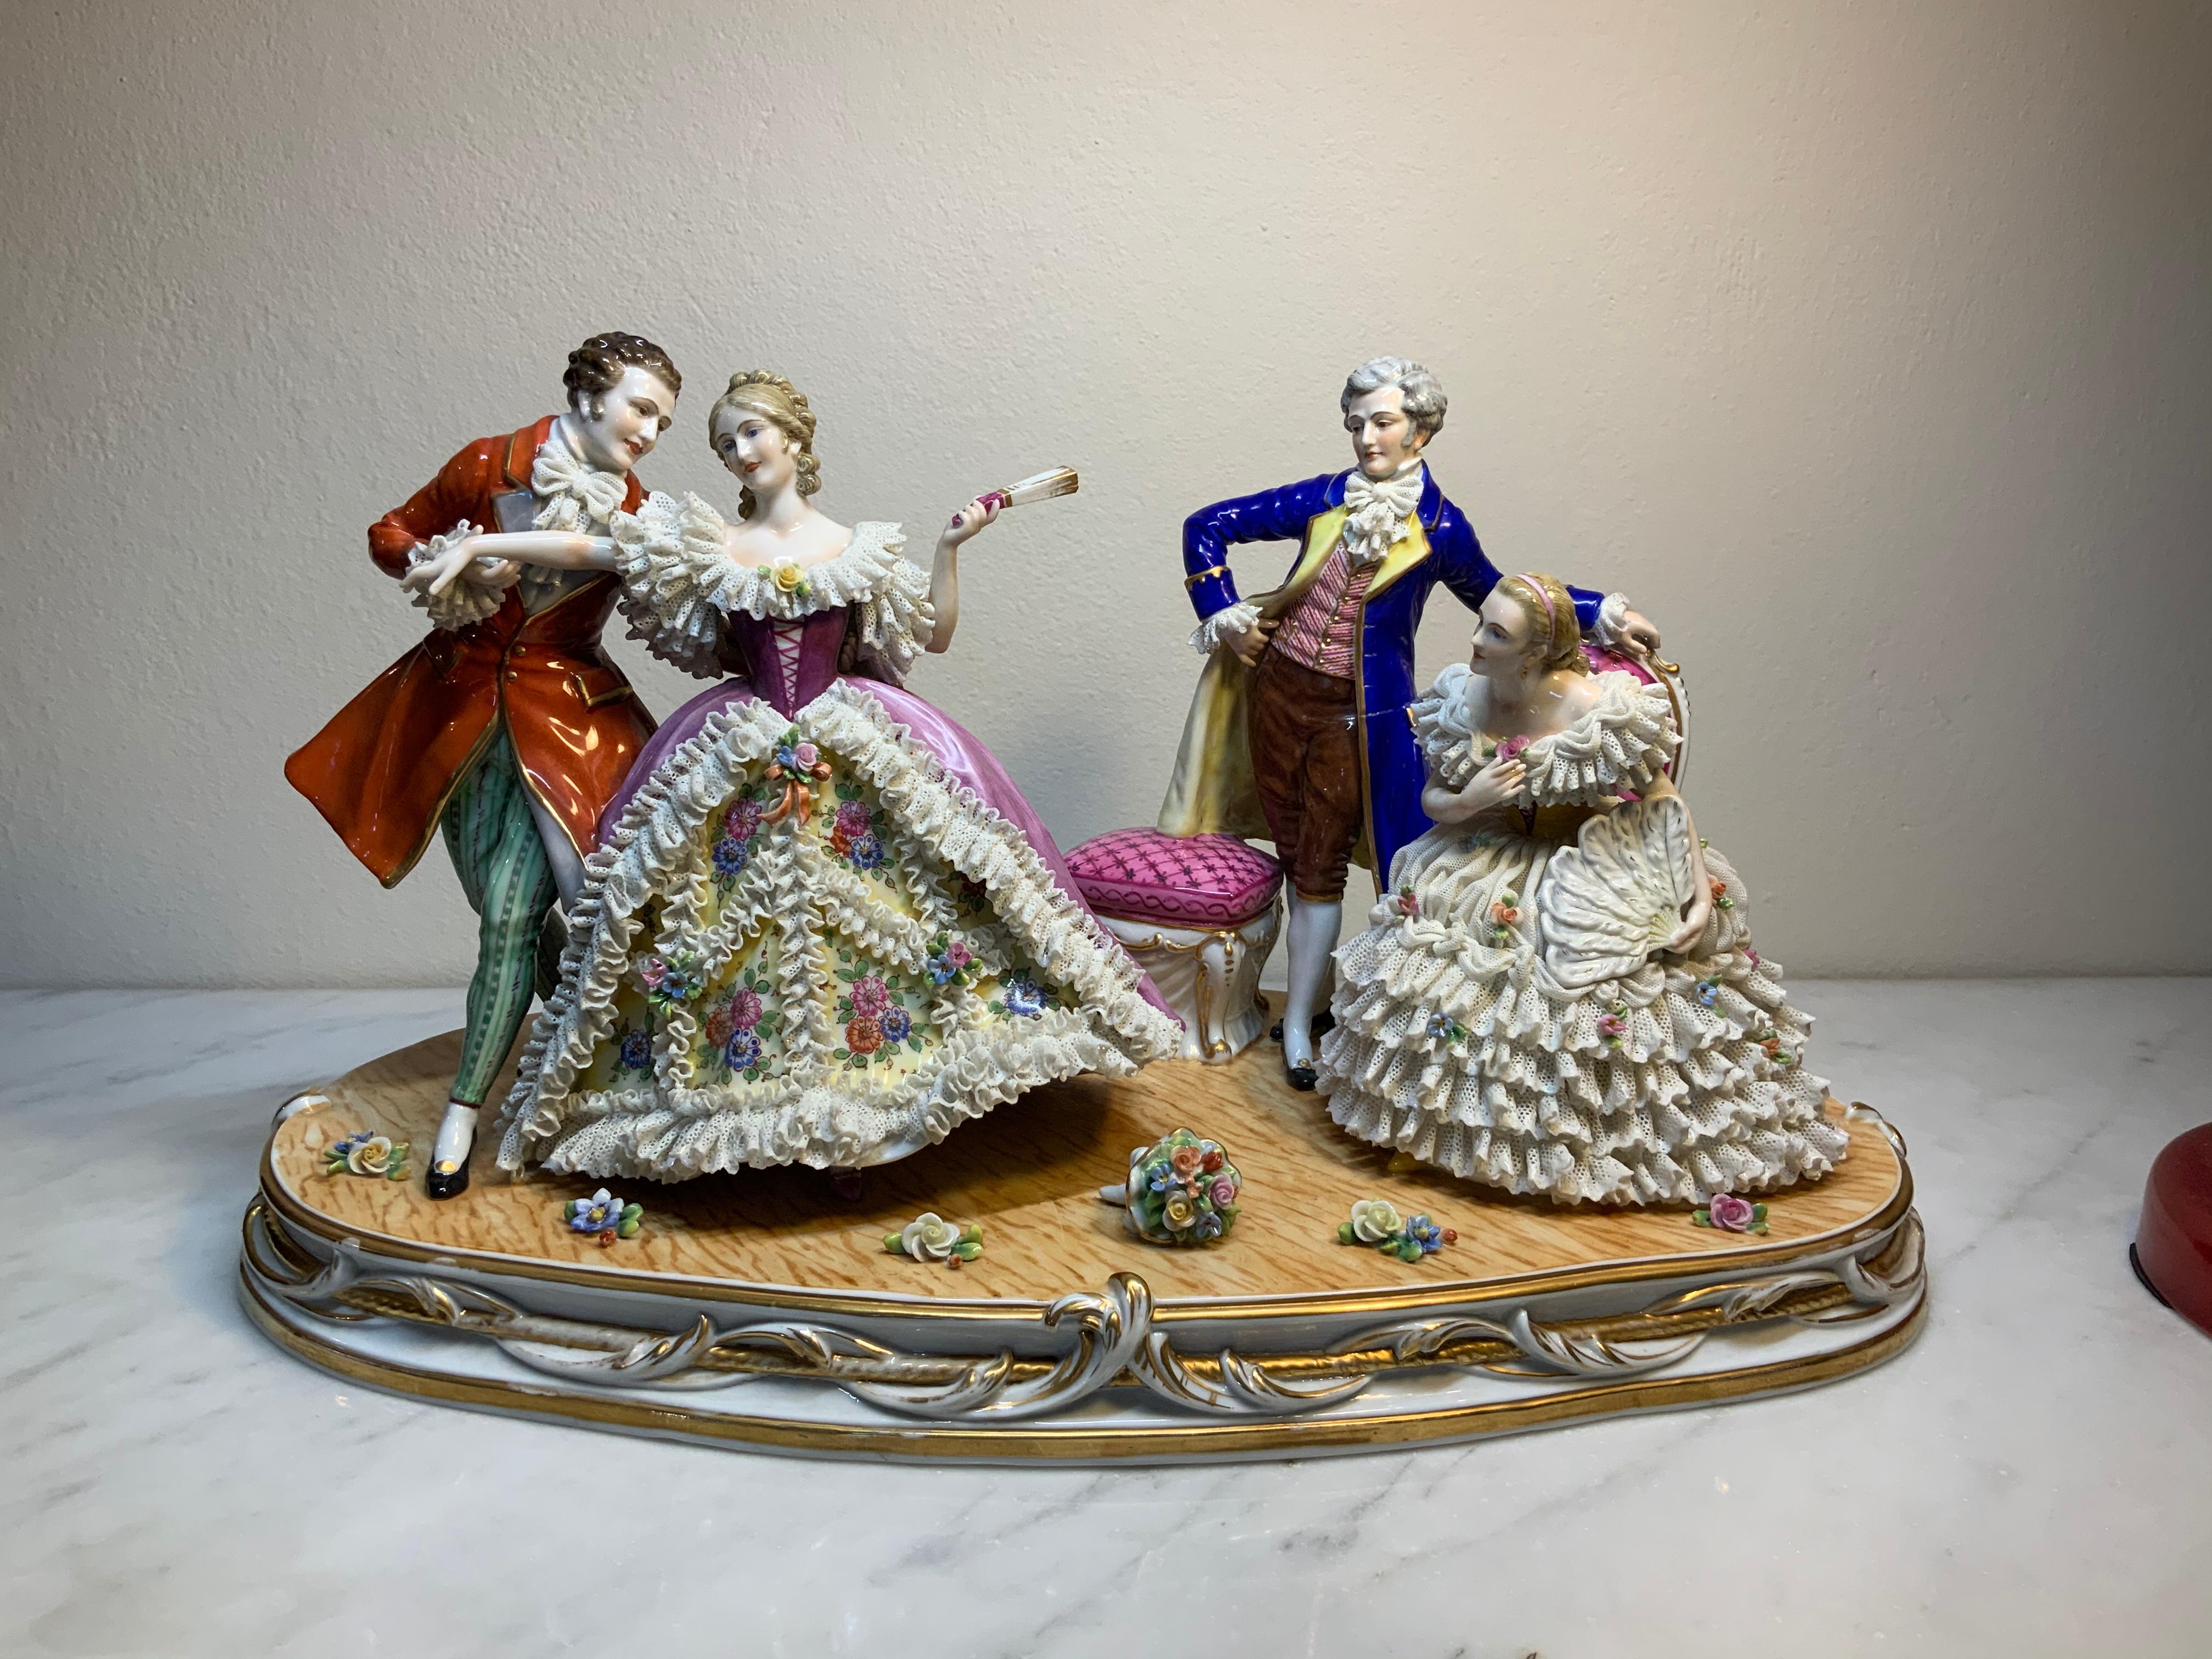 This is a Dresden Lace Porcelain group featuring a ballroom scene where there are two couples. One couple is dancing while the other one is observing them. The figurines are dressed with glazed colorful 18th Century attires. The skirts of the ladies